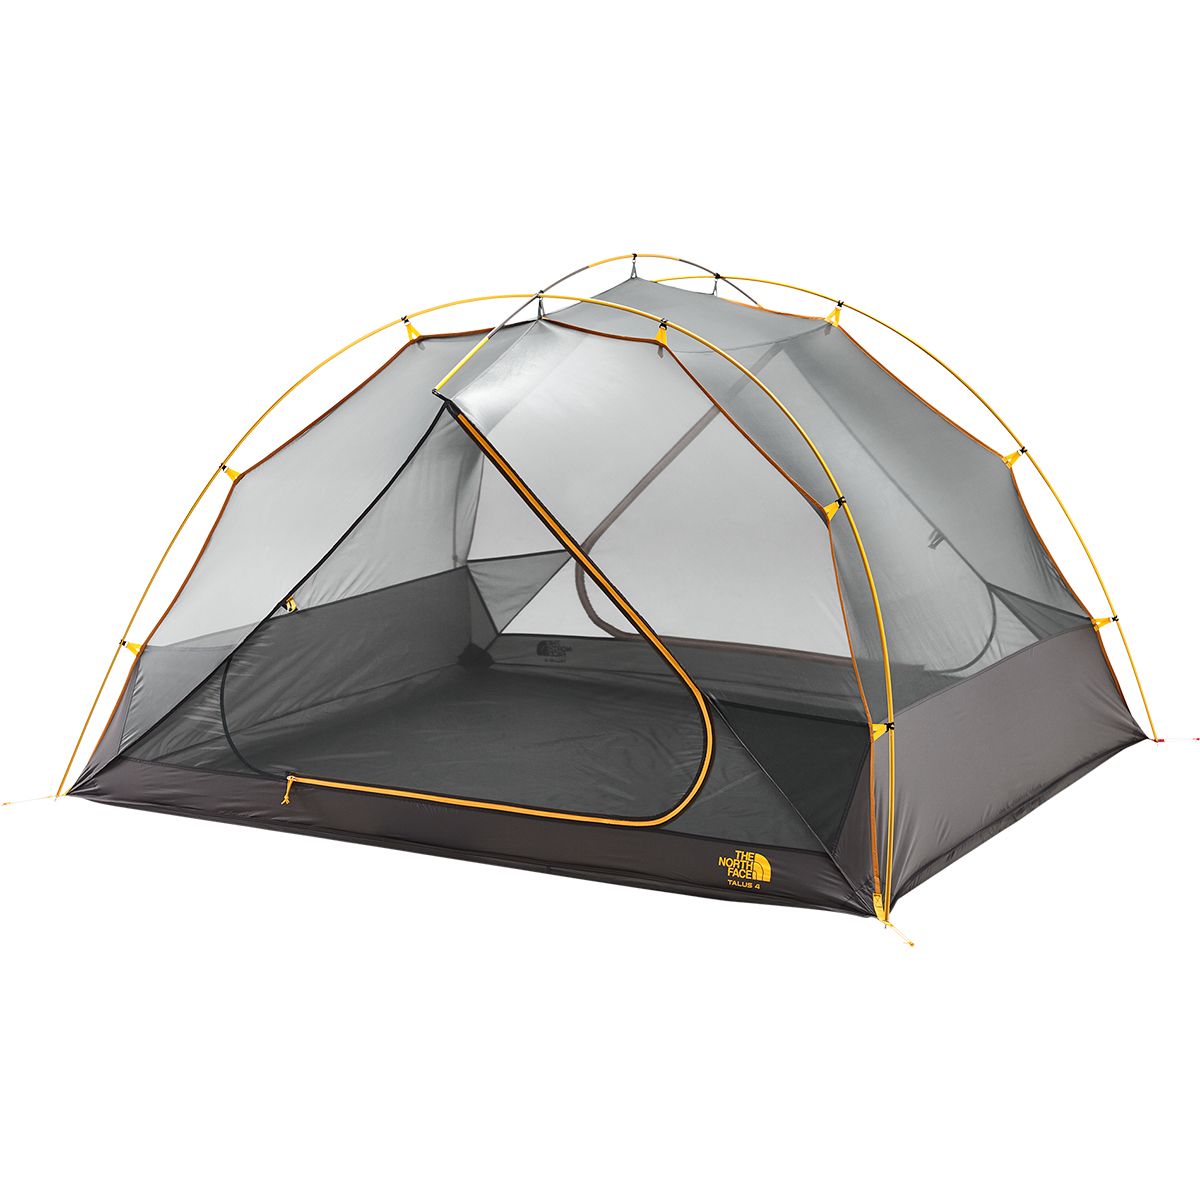 The North Face Talus 4 Tent: 4-Person 3-Season Hike & Camp